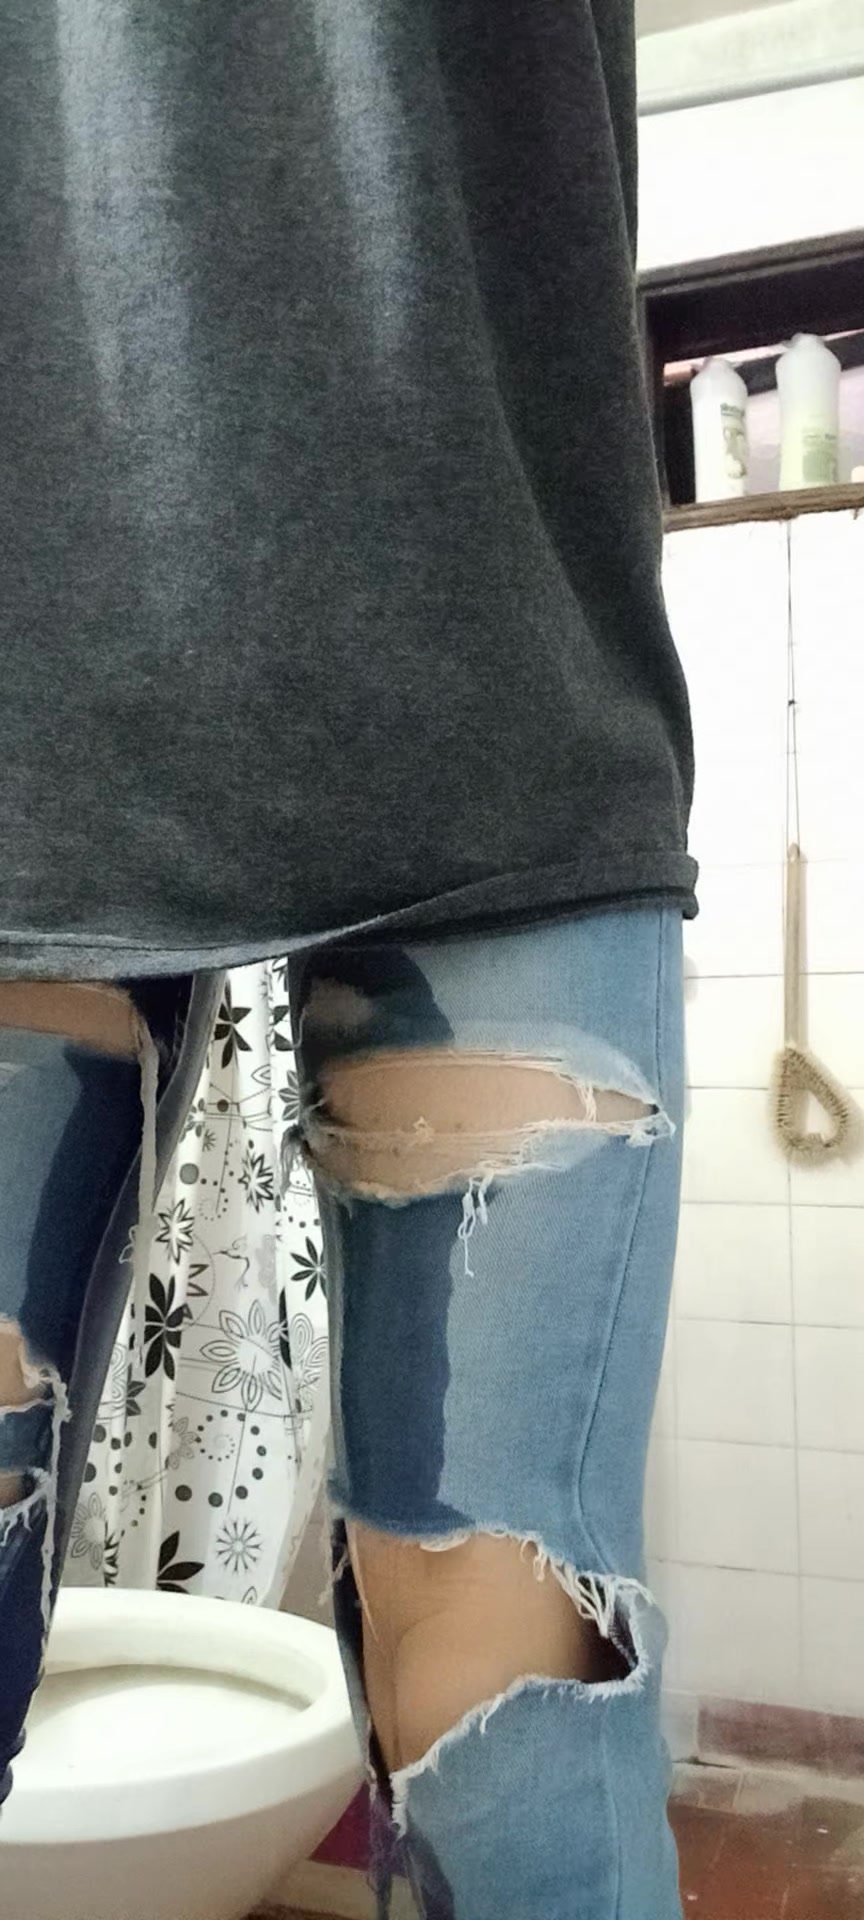 Pissing my jeans in Bathroom